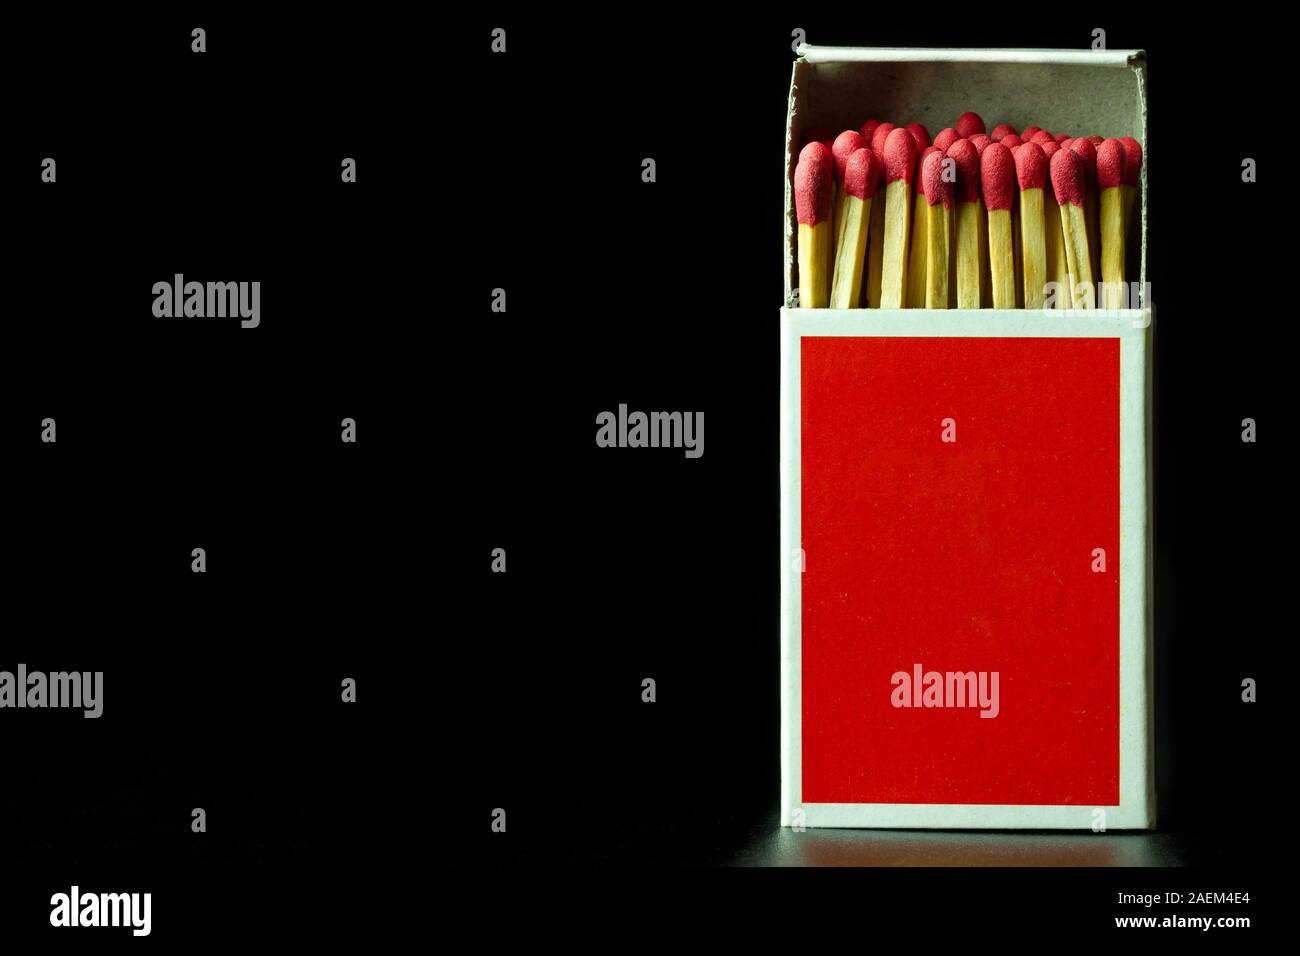 Matches stick in red paper box on black background. Closeup and copy space. Stock Photo